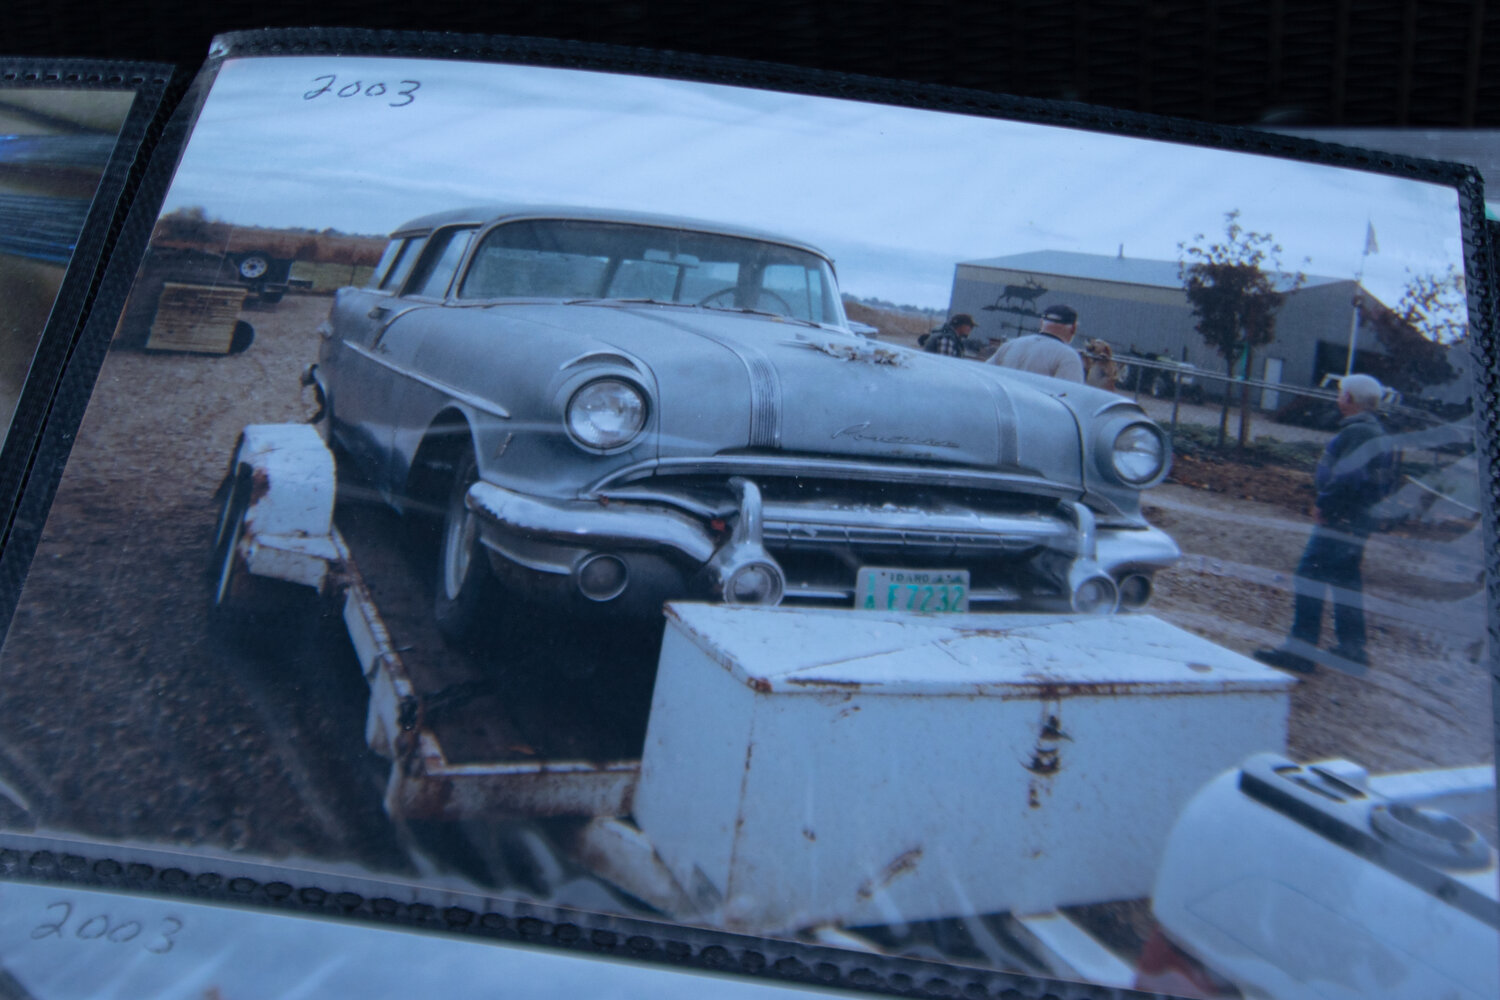 Before he restored it, Thomas Kelly picked up his 1956 Pontiac Safari wagon from Idaho in 2003.